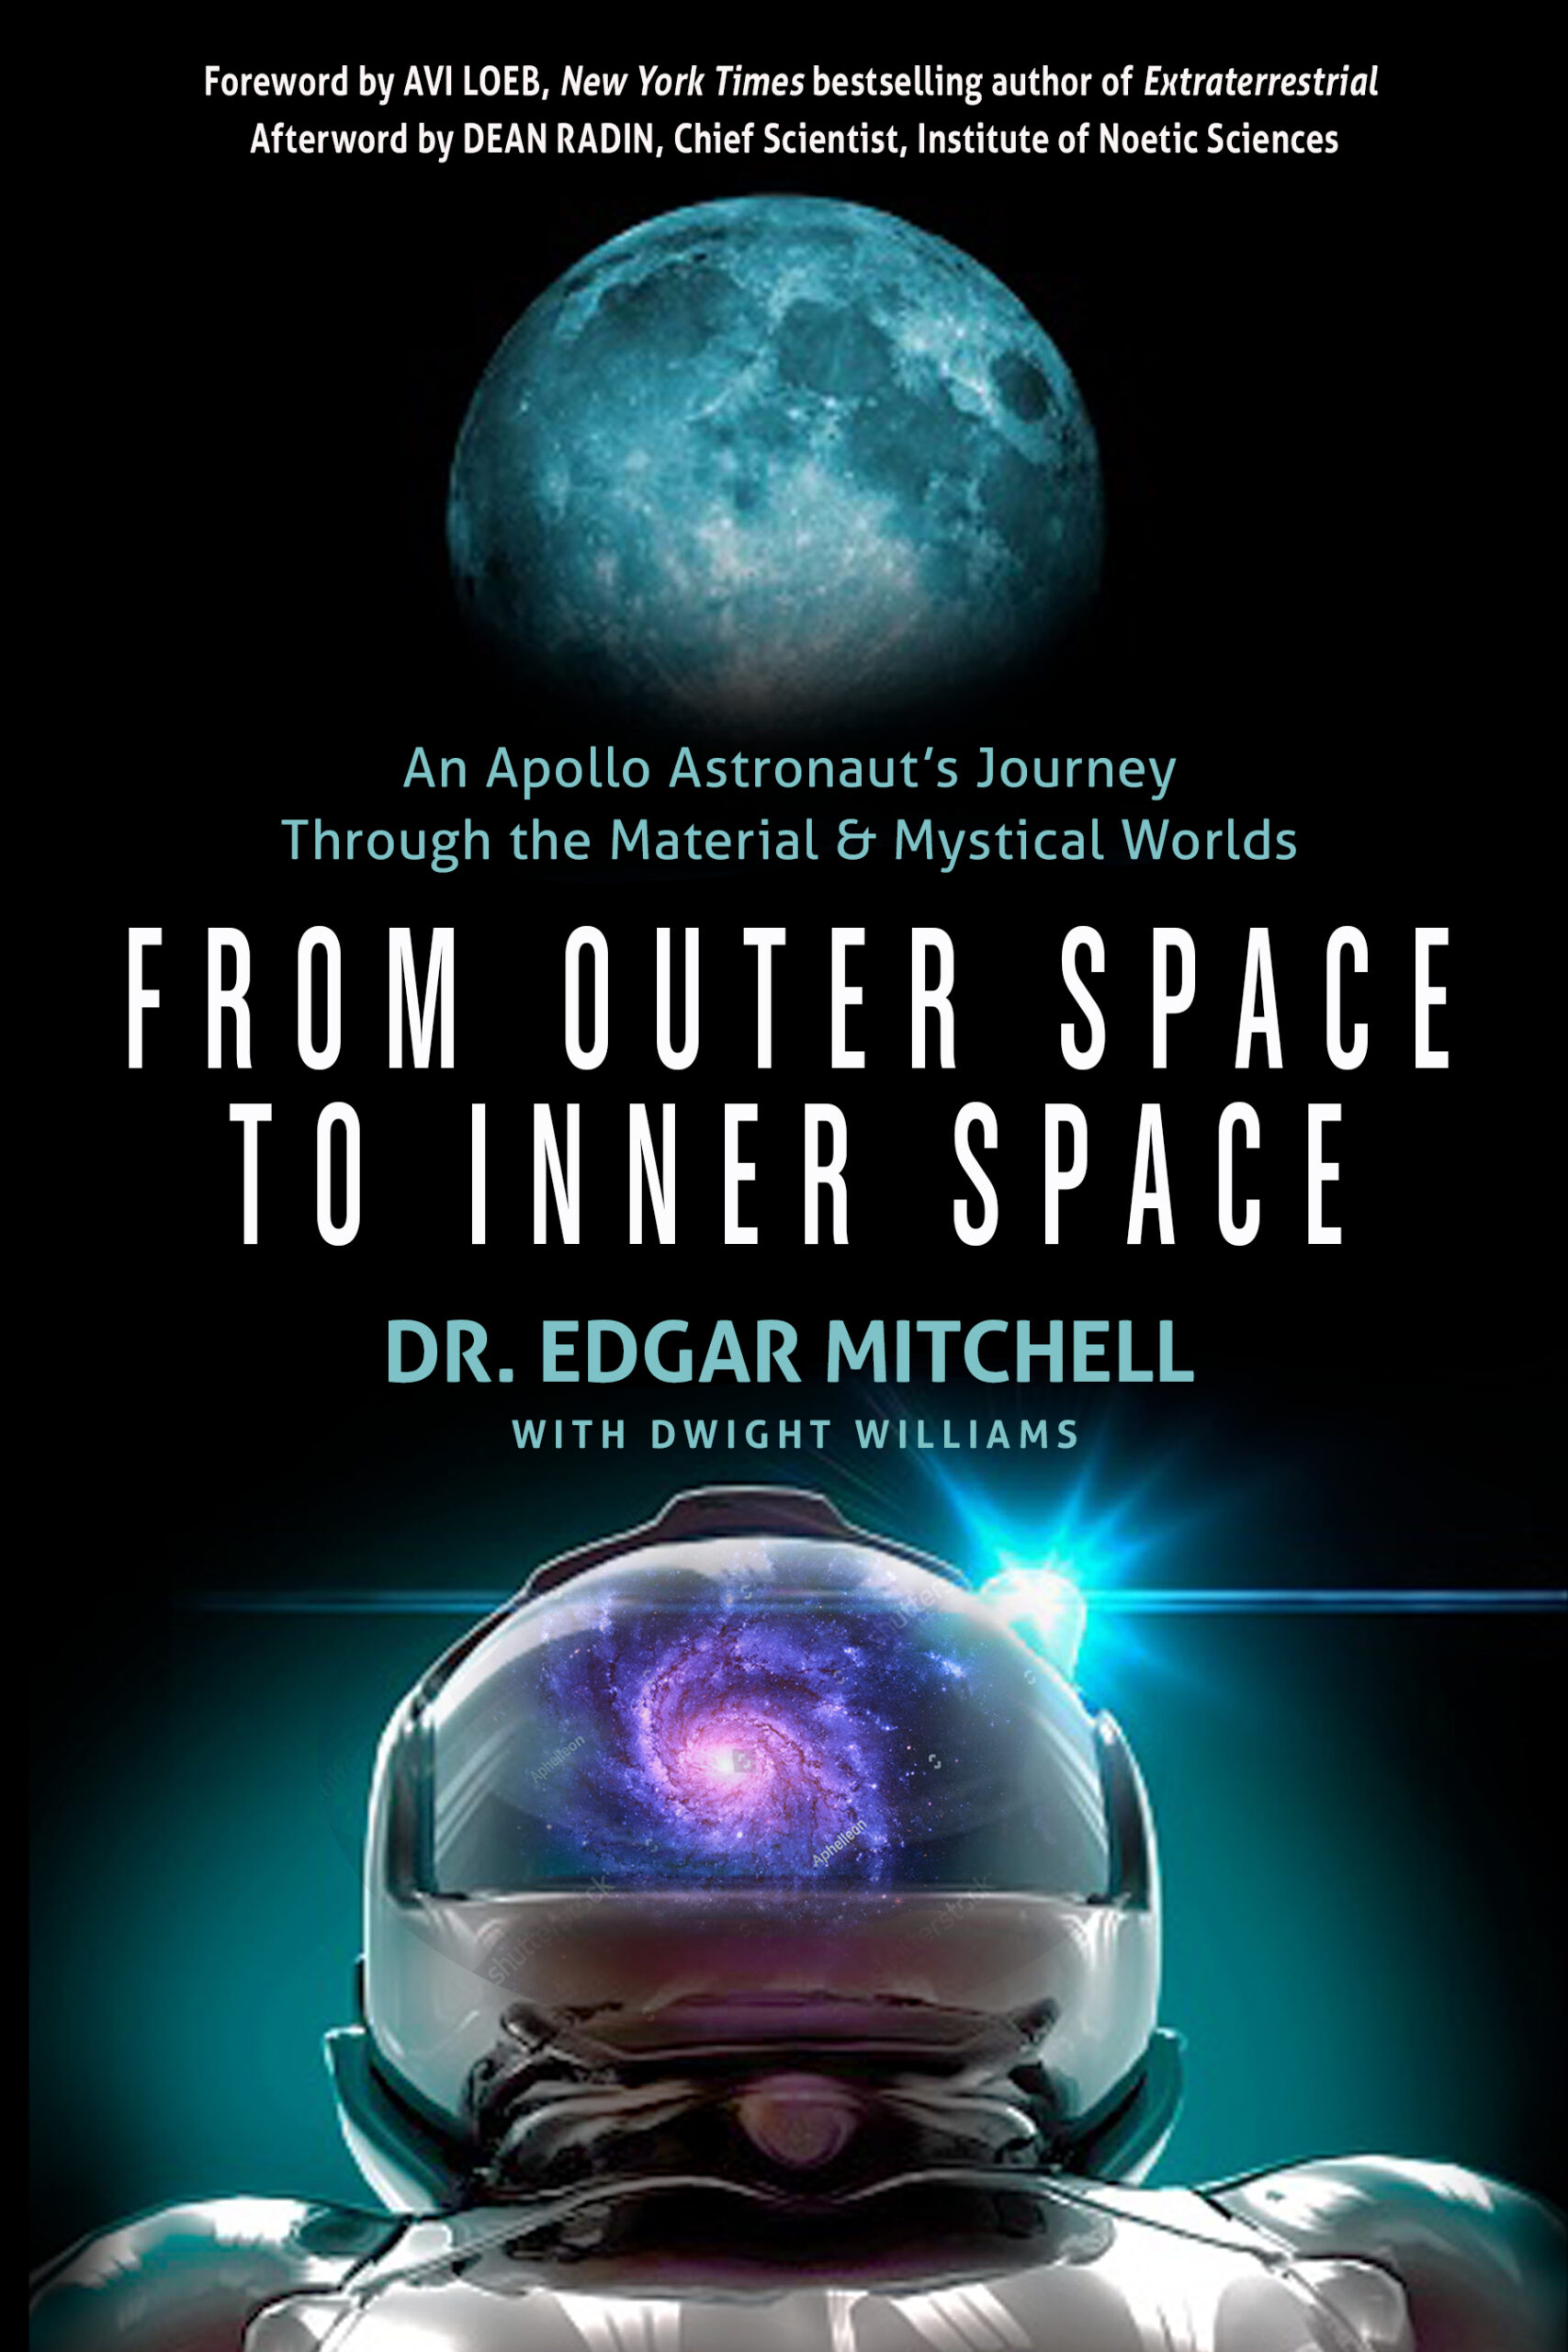 From Outer Space to Inner Space by Dr. Edgar Mitchell